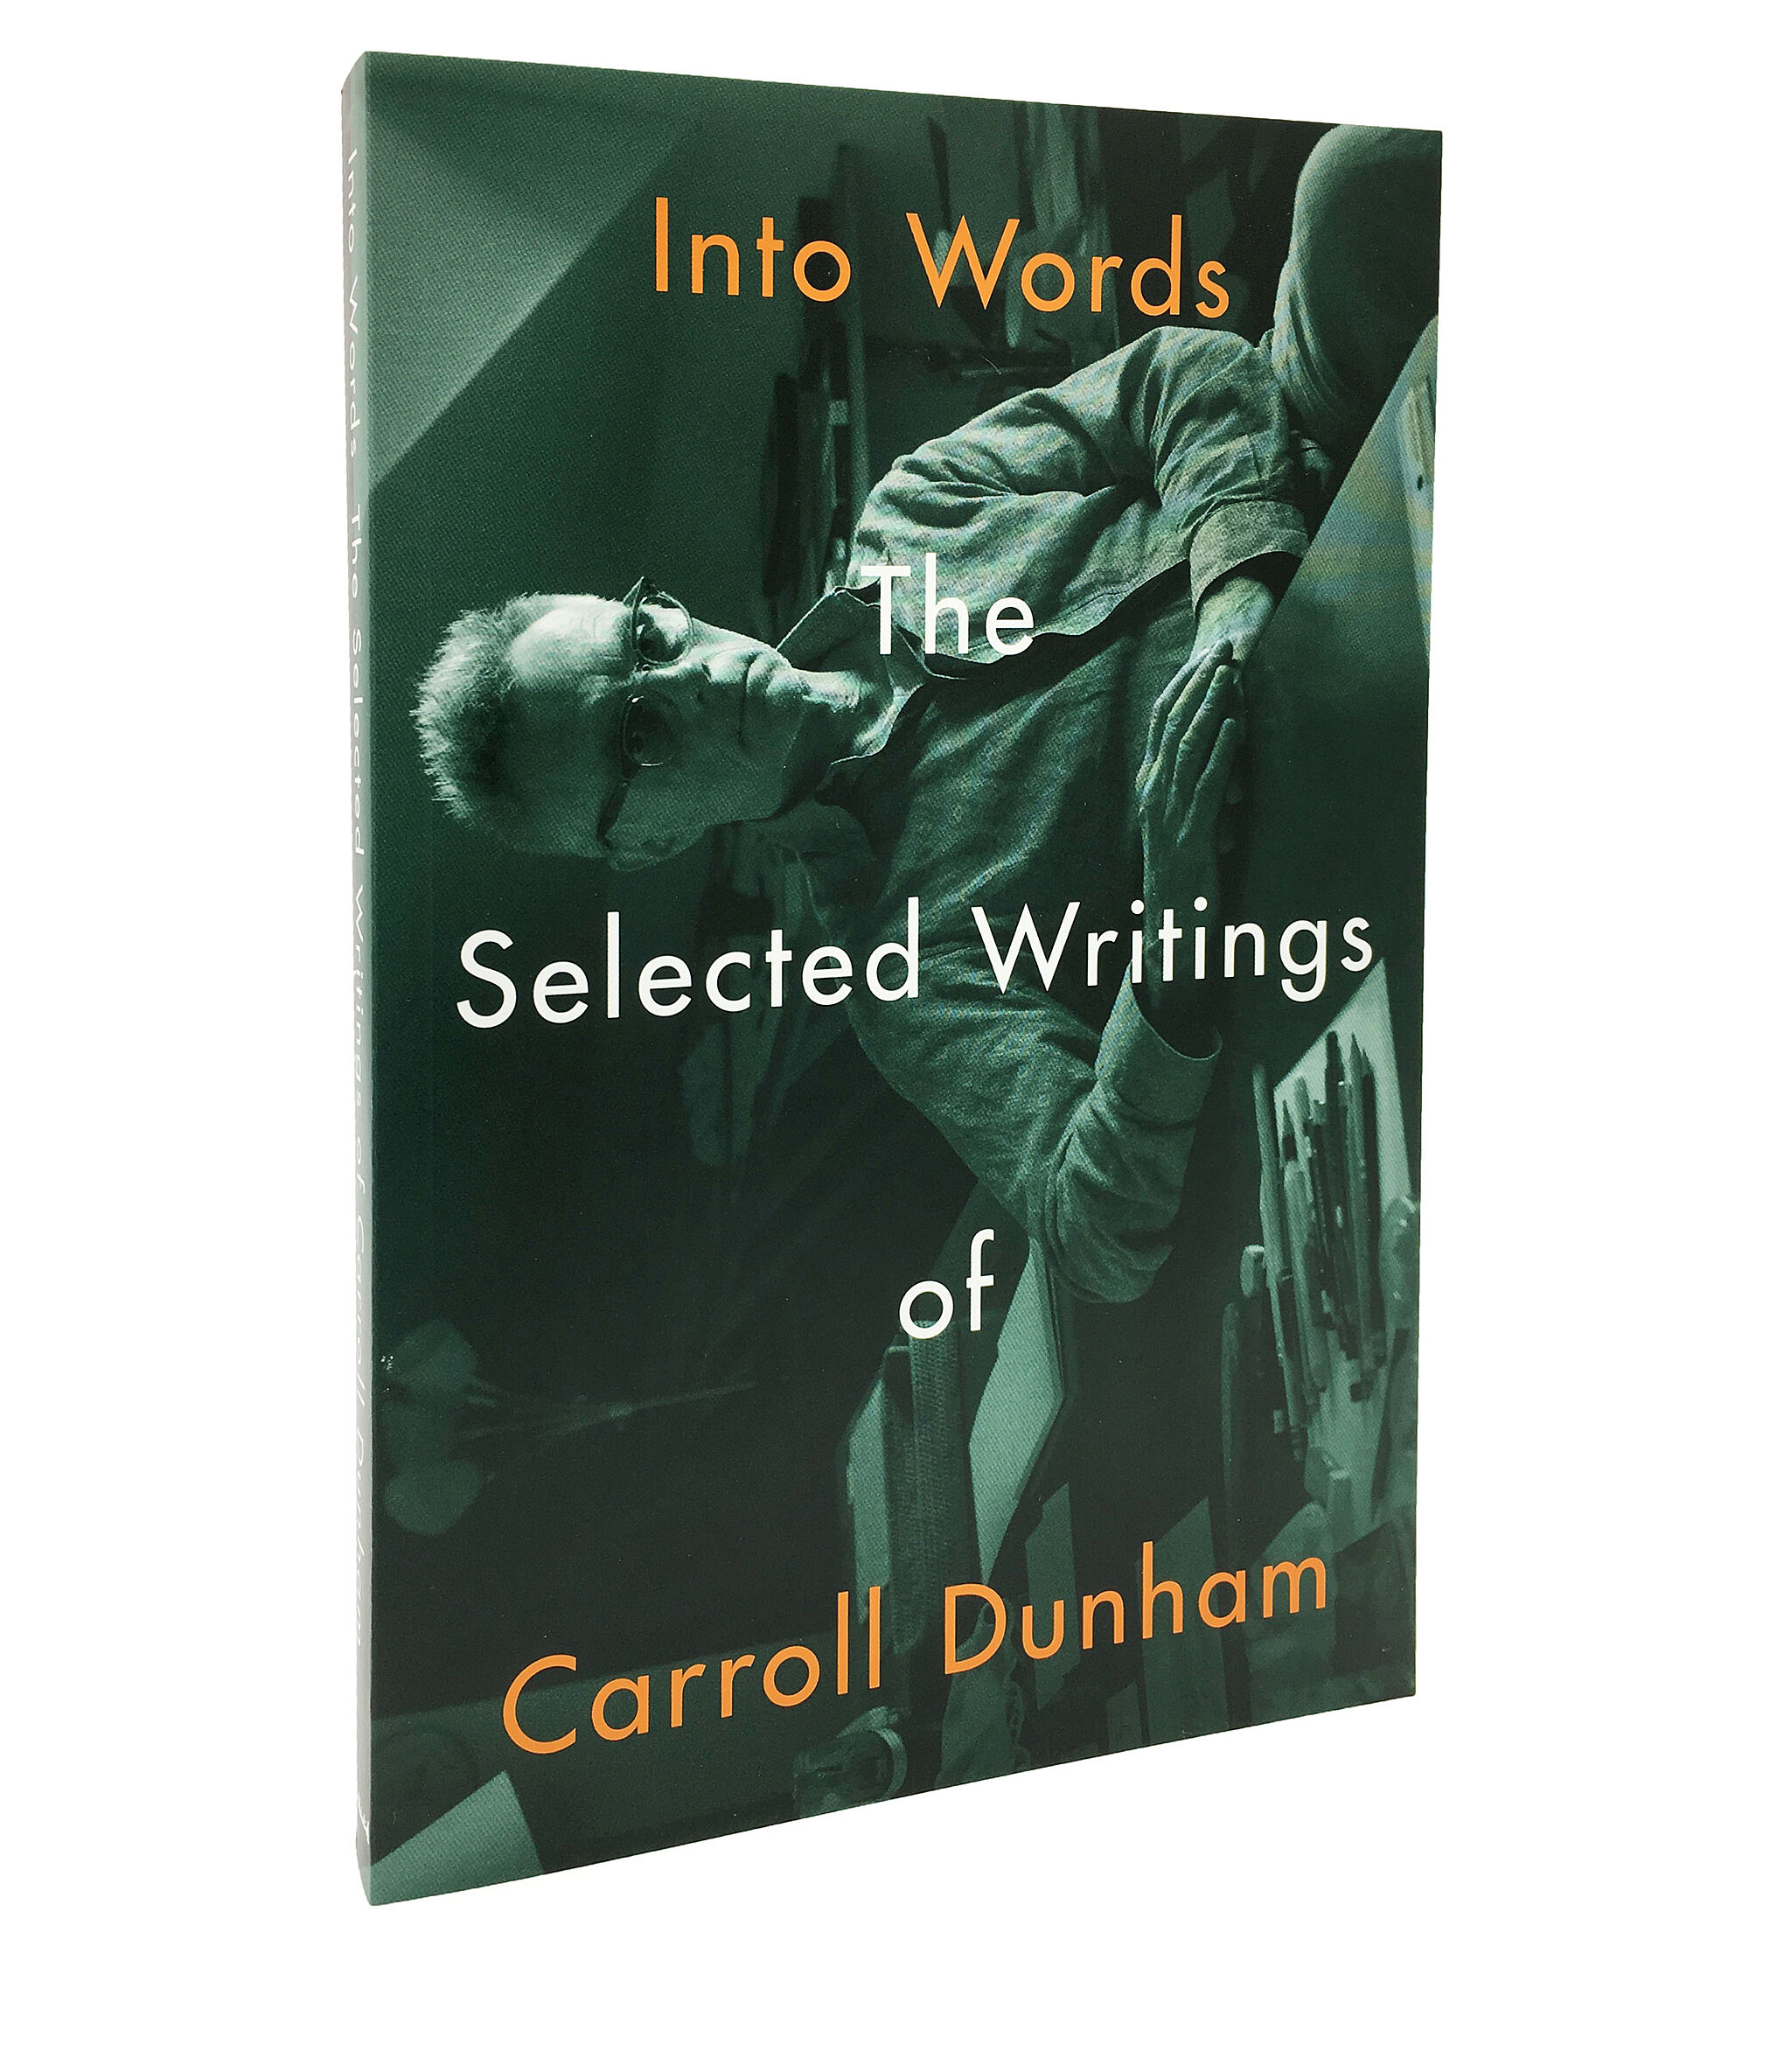 Cover of "Into Words: The Selected Writings of Carroll Dunham."